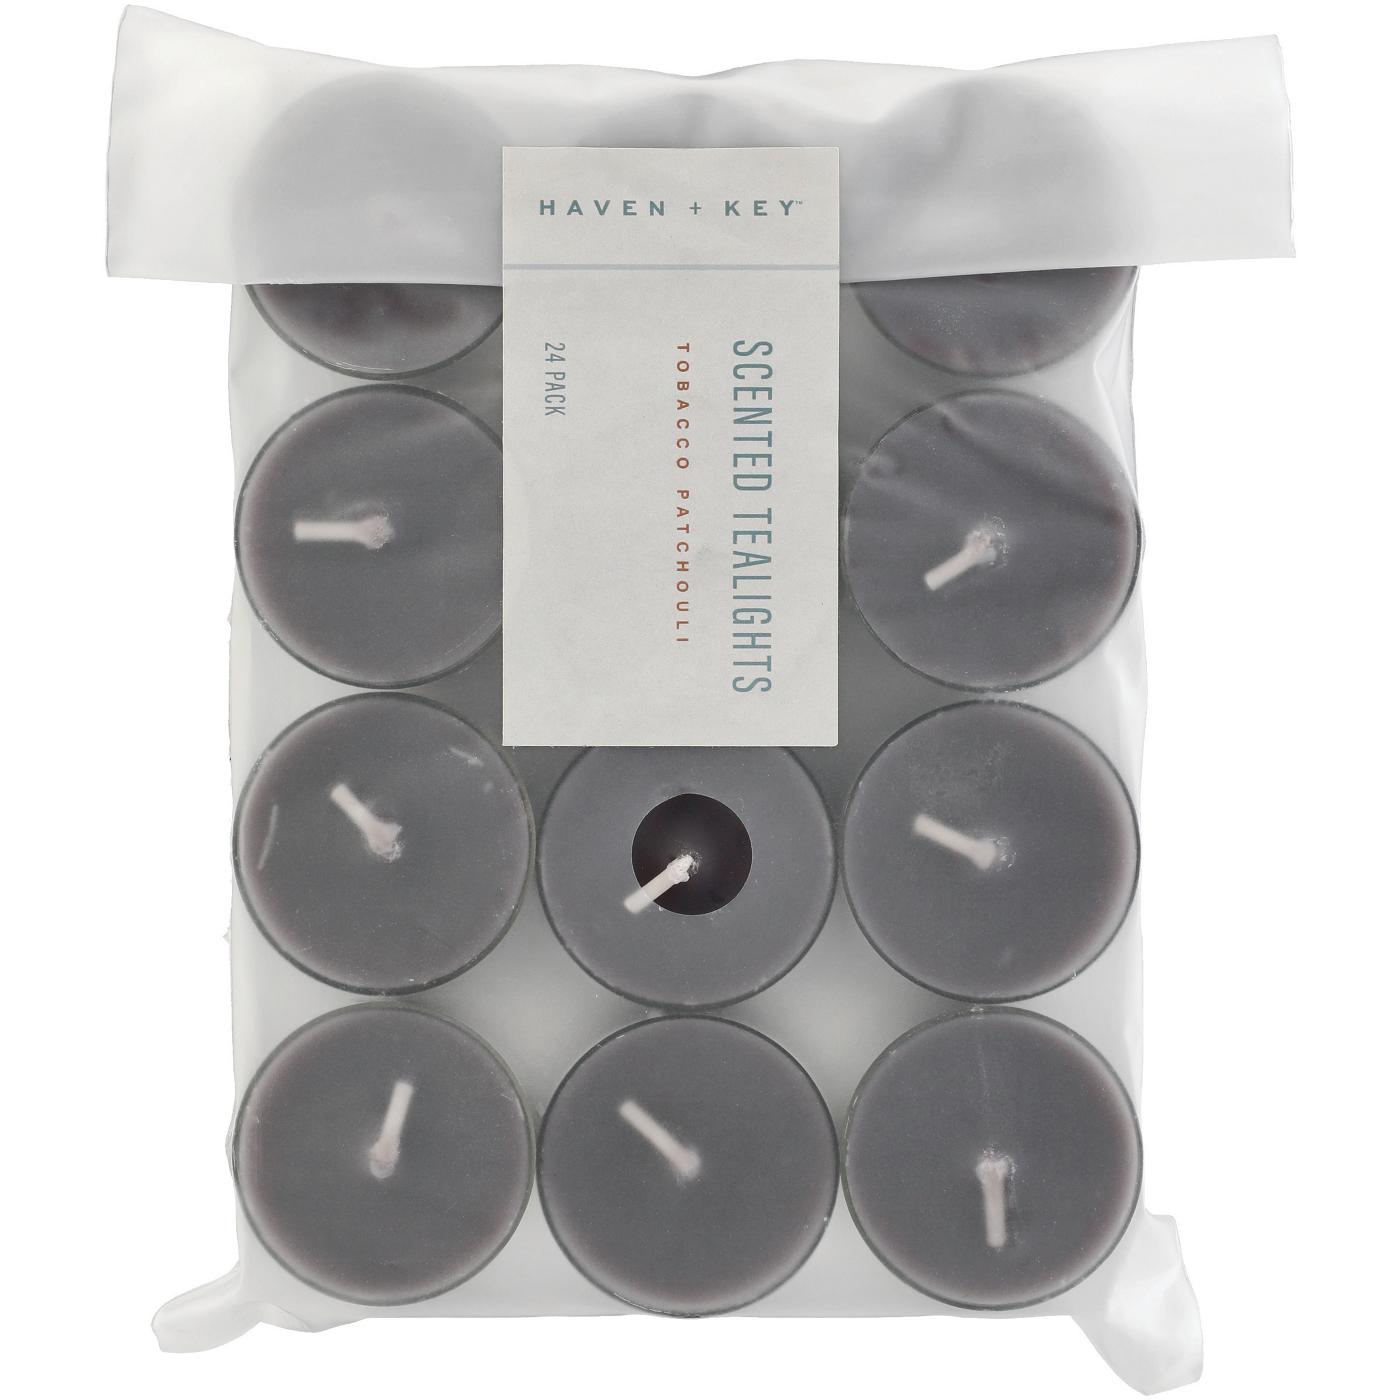 Haven + Key Tobacco & Patchouli Scented Tealights; image 1 of 2